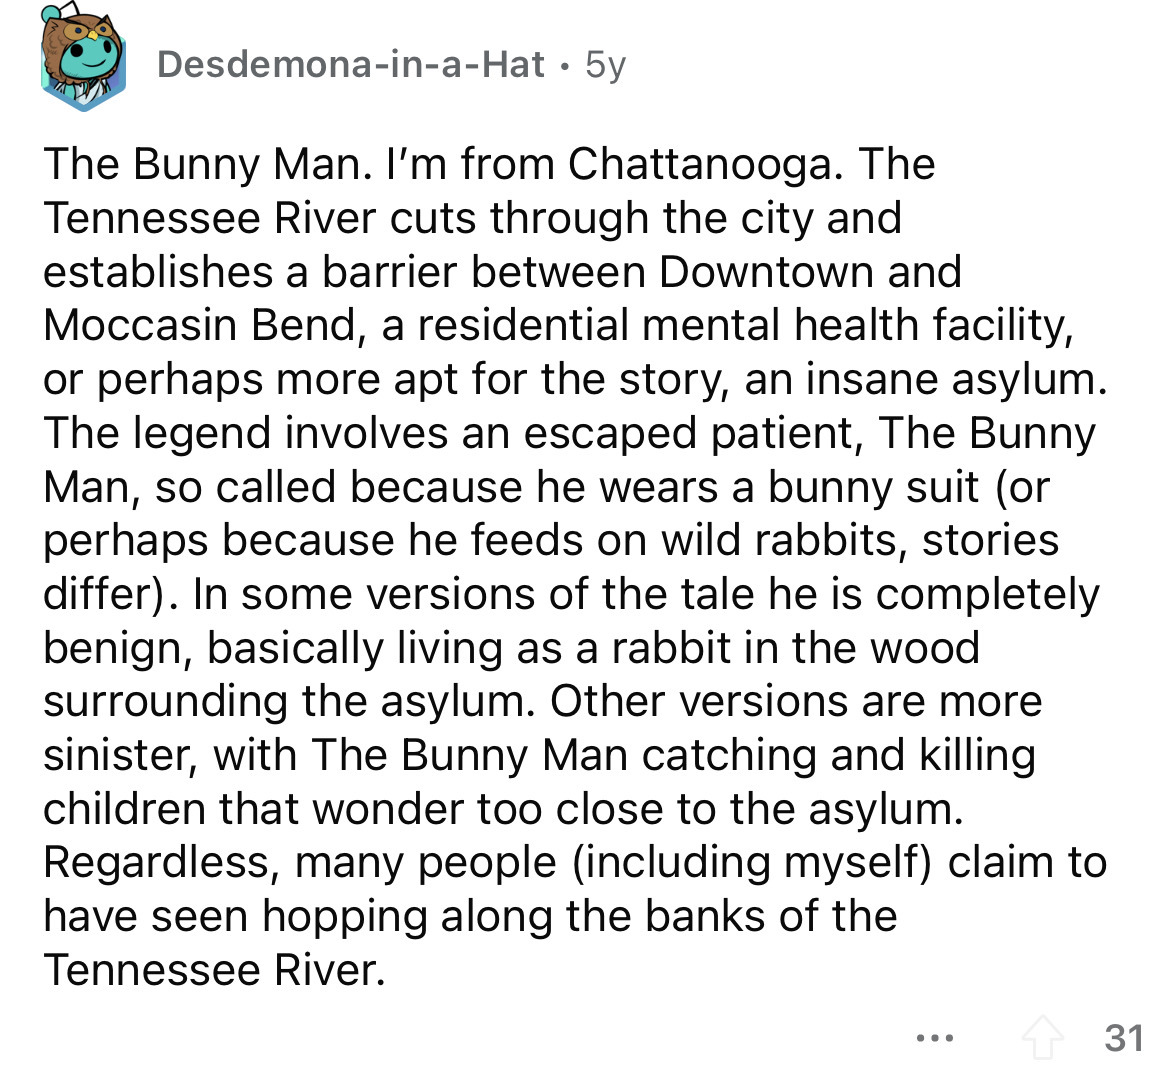 point - DesdemonainaHat 5y The Bunny Man. I'm from Chattanooga. The Tennessee River cuts through the city and establishes a barrier between Downtown and Moccasin Bend, a residential mental health facility, or perhaps more apt for the story, an insane asyl